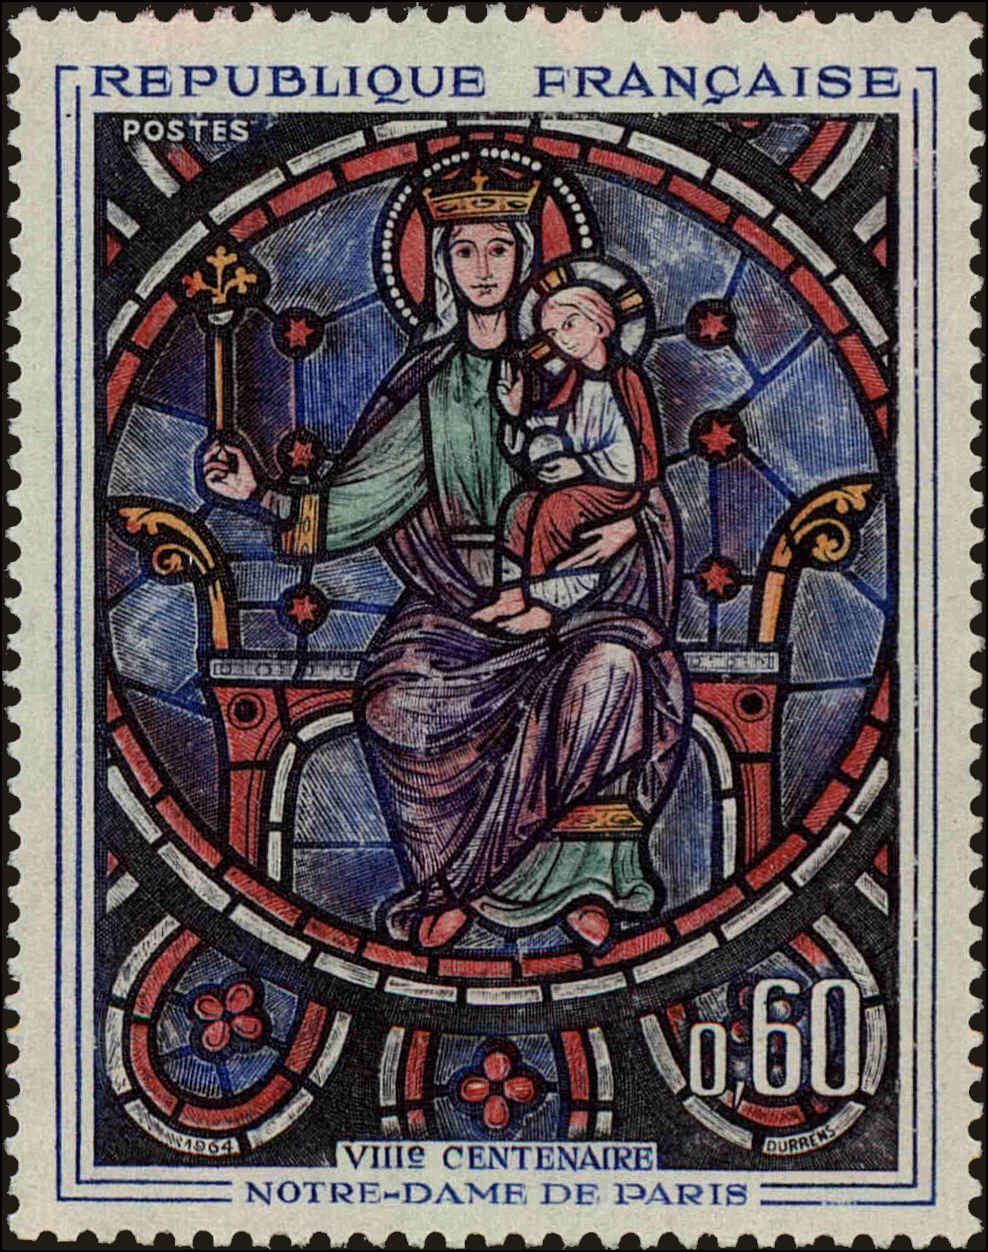 Front view of France 1090 collectors stamp